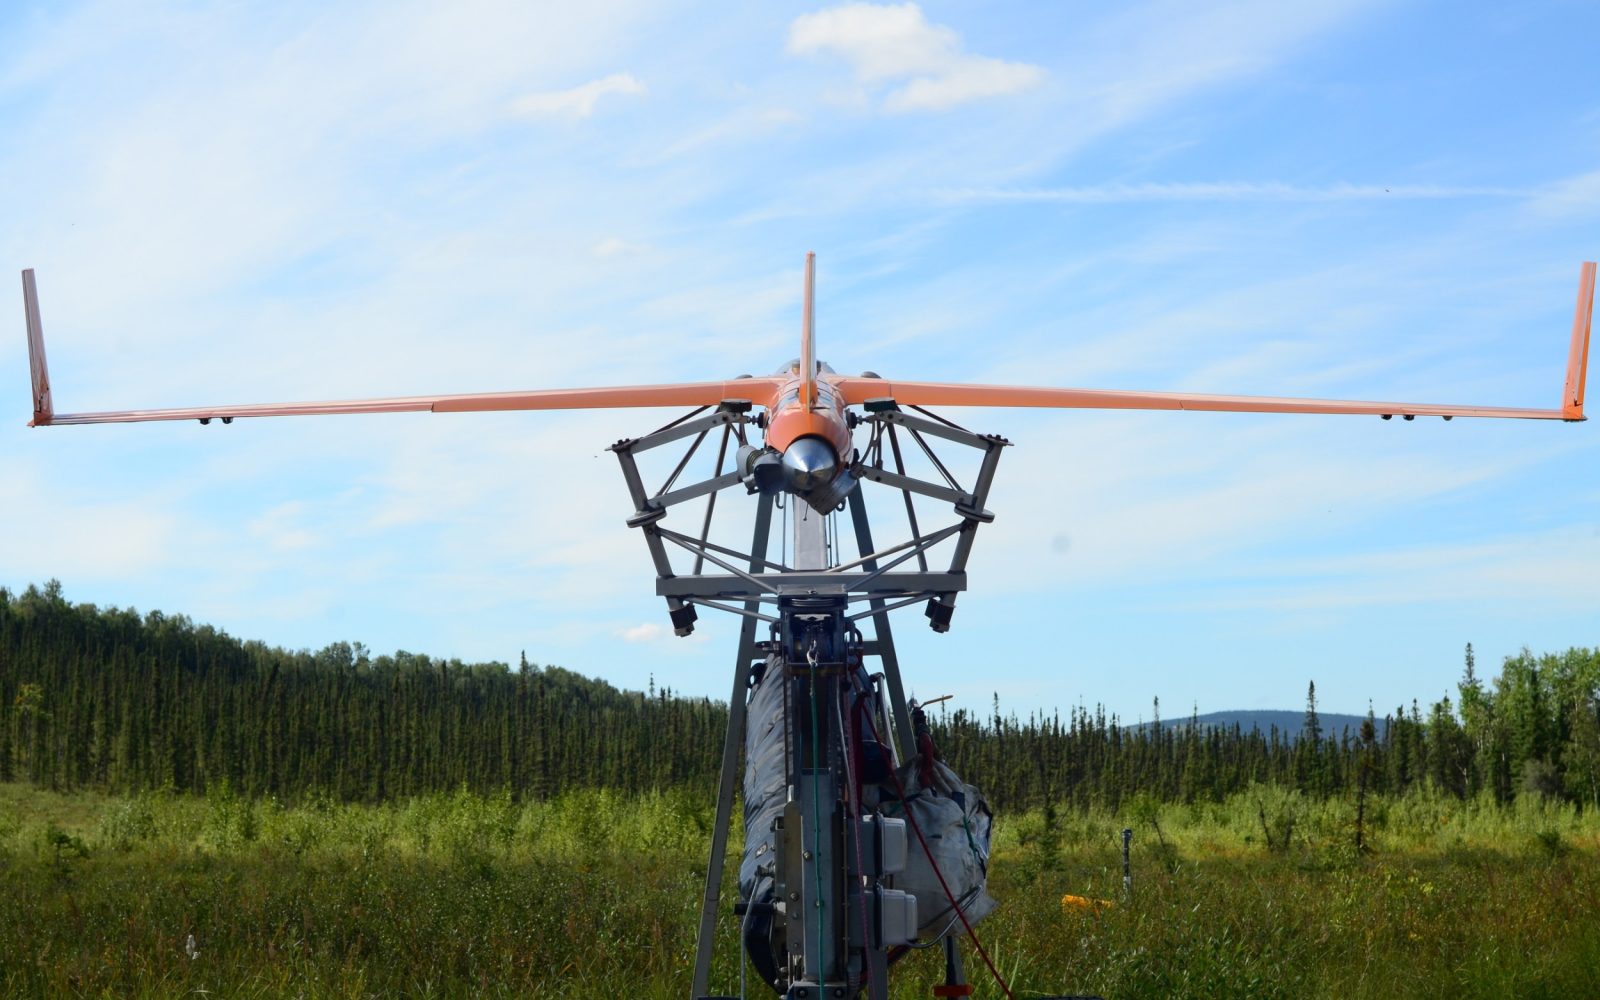 FAA approves University of Alaska Fairbanks and Insitu for BVLOS and nighttime drone flights